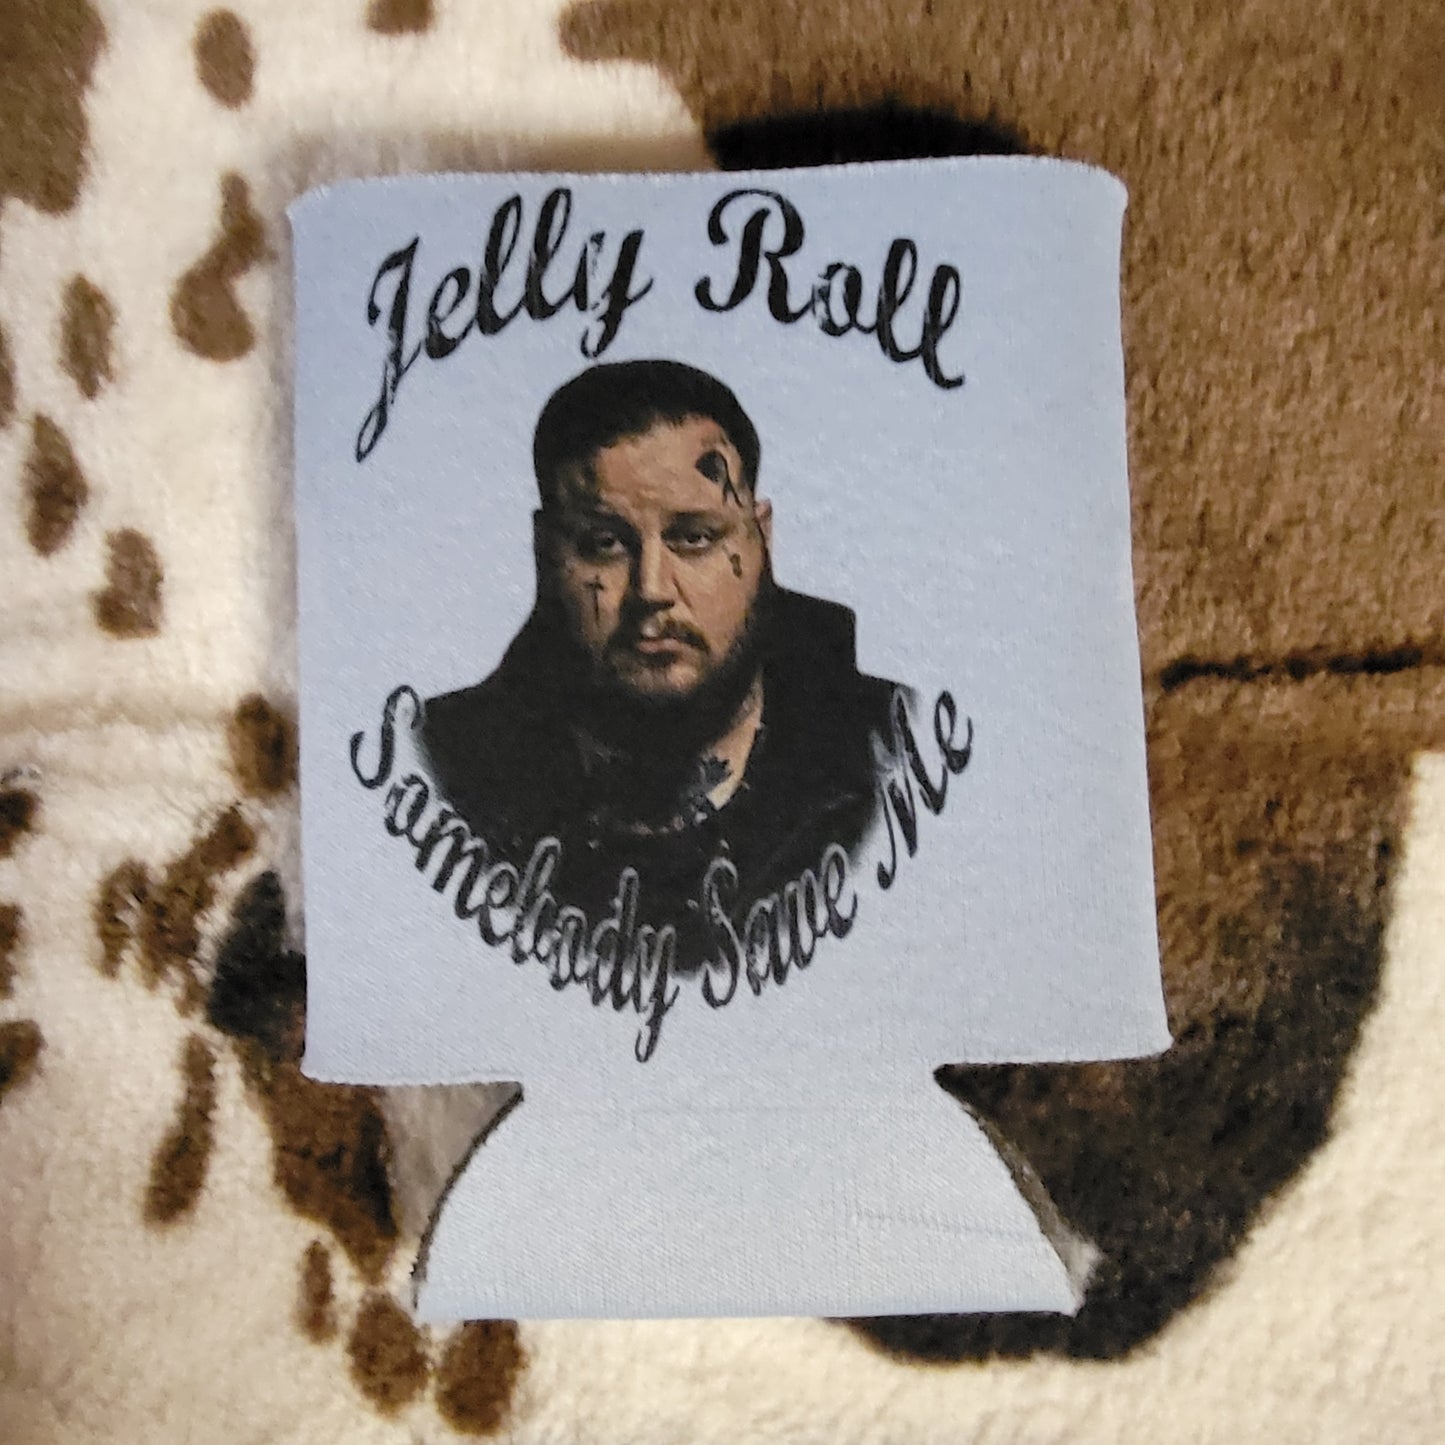 Jelly Roll Can Cooler Drink Holder Koozie